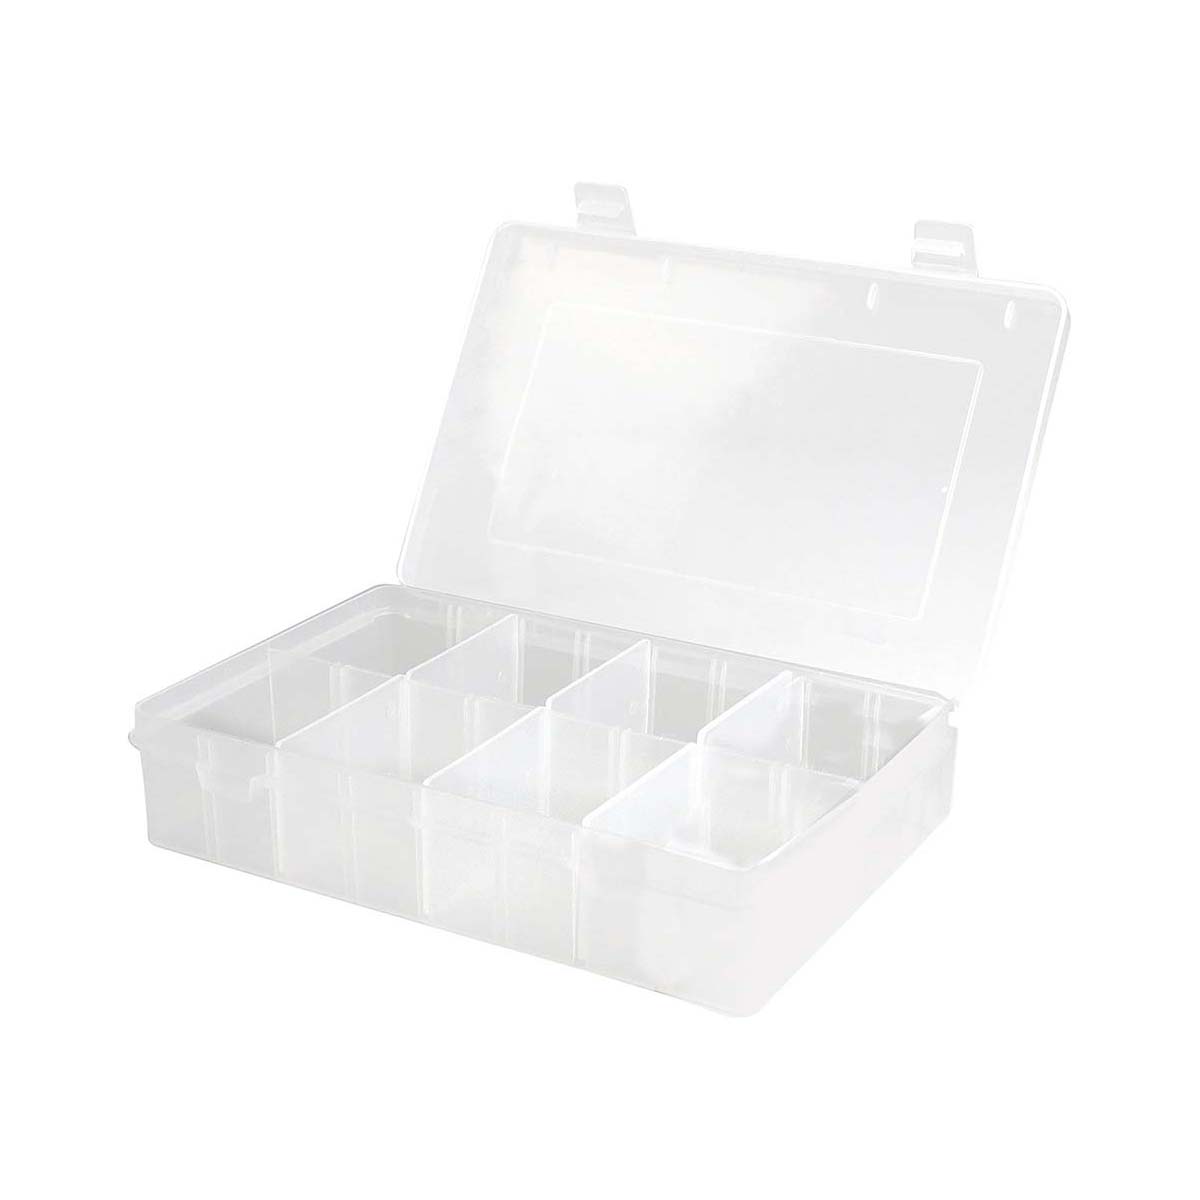 KT Cables Empty Kit, Removable Spacers, 12 Compartment Tray